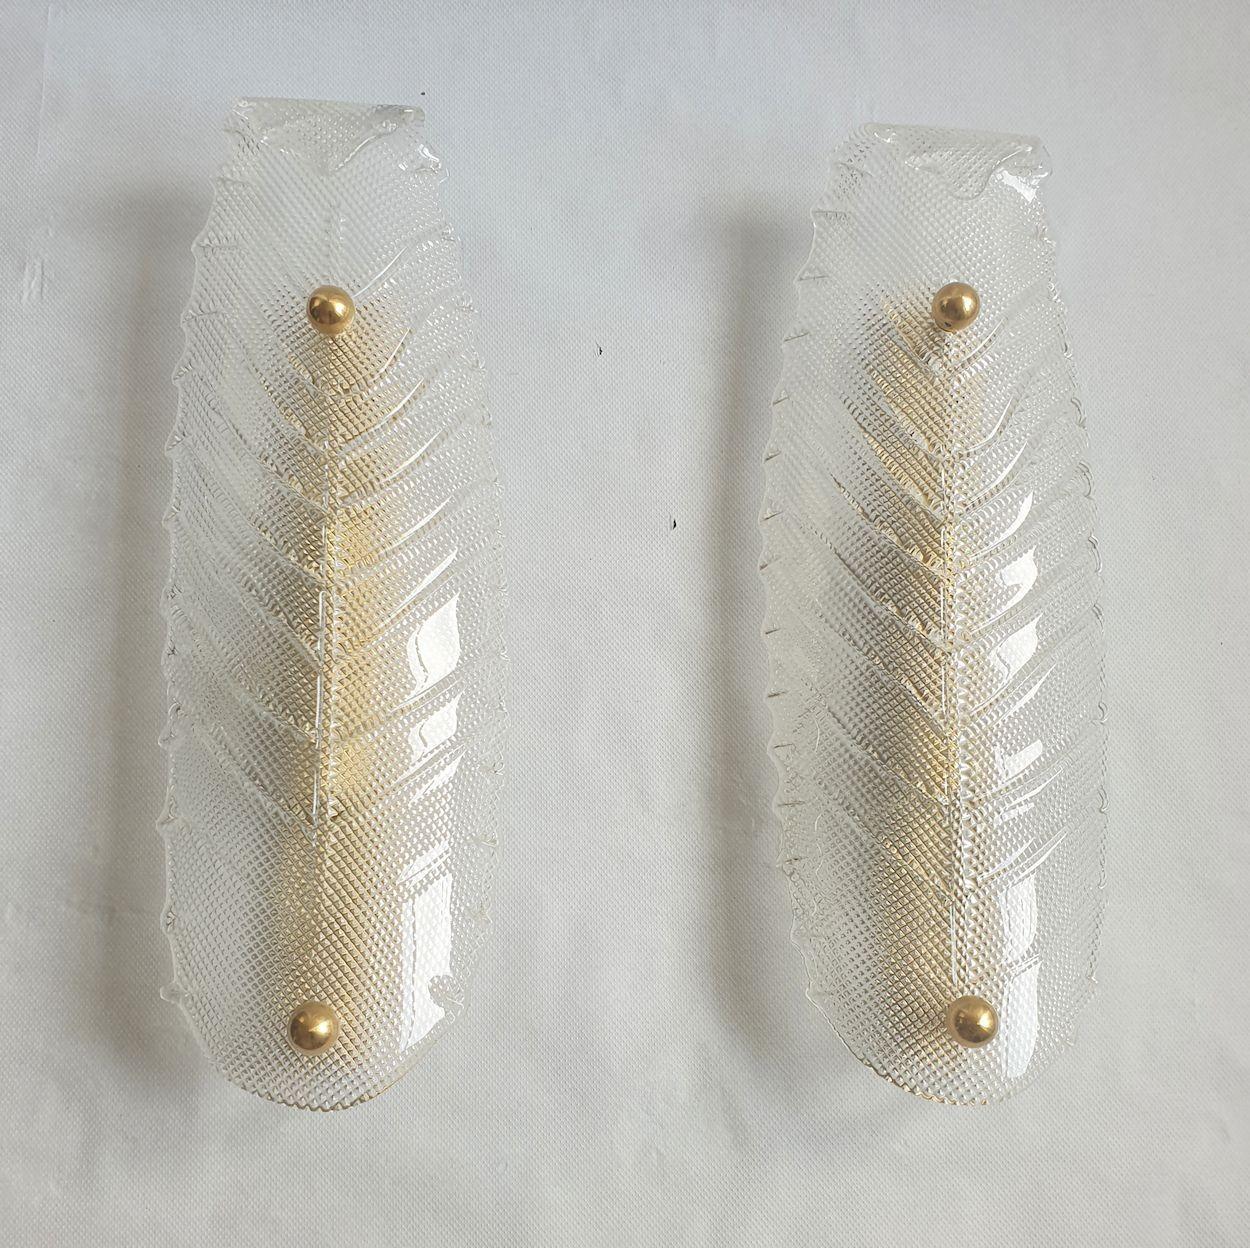 Pair of large Mid Century Modern Murano glass sconces, attributed to Vistosi, Italy 1970s.
The vintage sconces have a stylized leaf shape, in a hand blown textured clear Murano glass.
The Italian sconces frame is in brass.
The sconces back plate